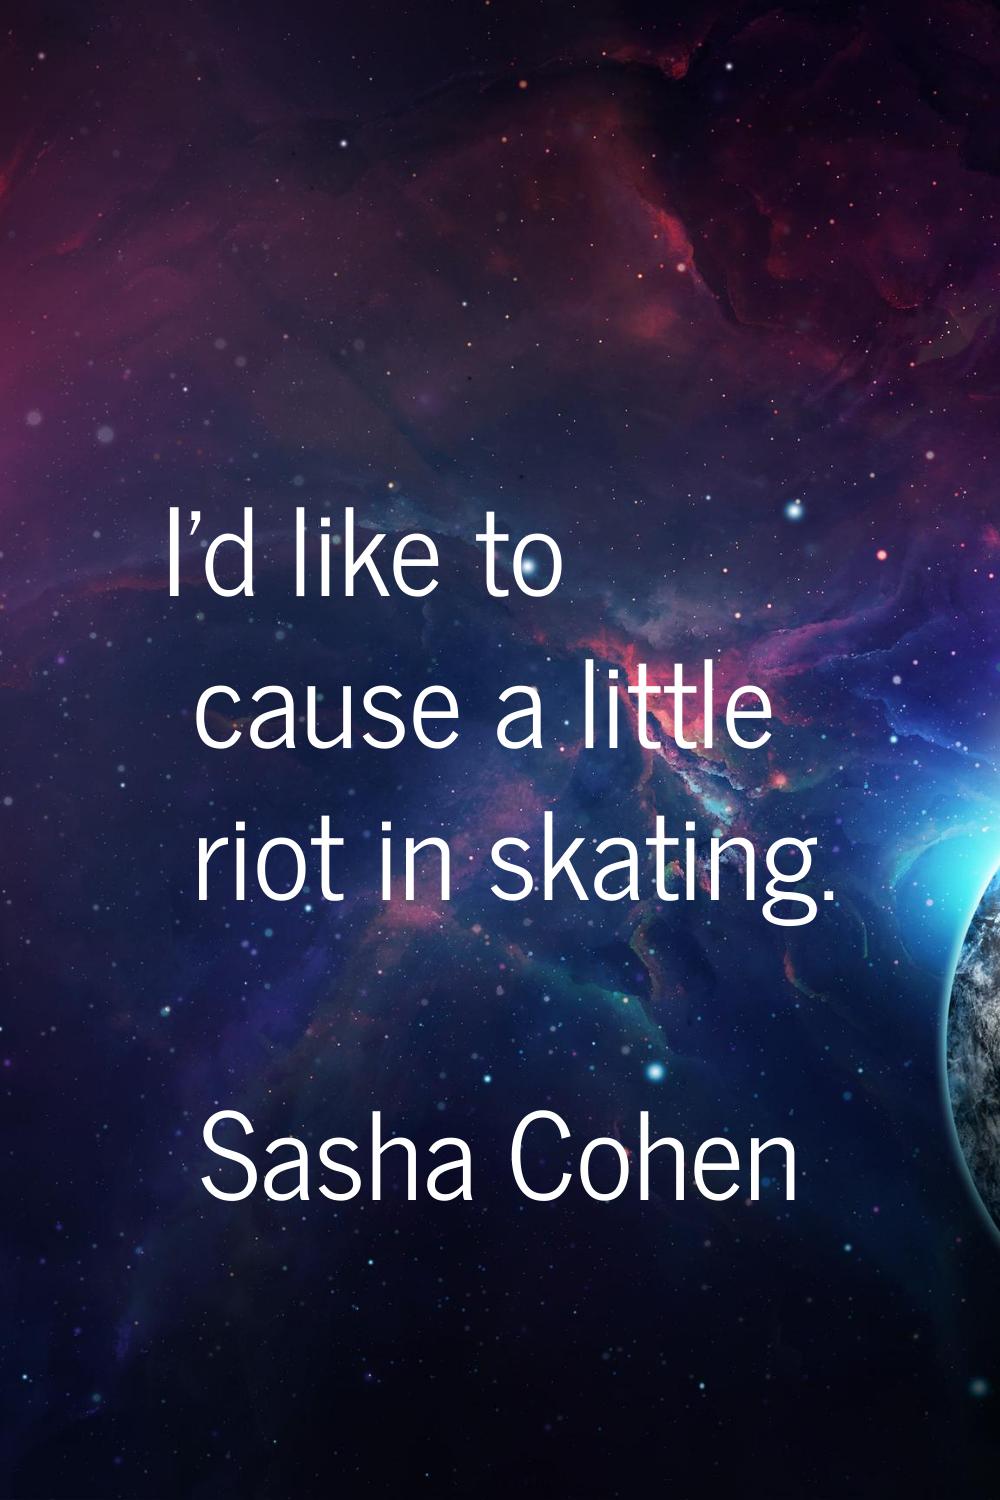 I'd like to cause a little riot in skating.